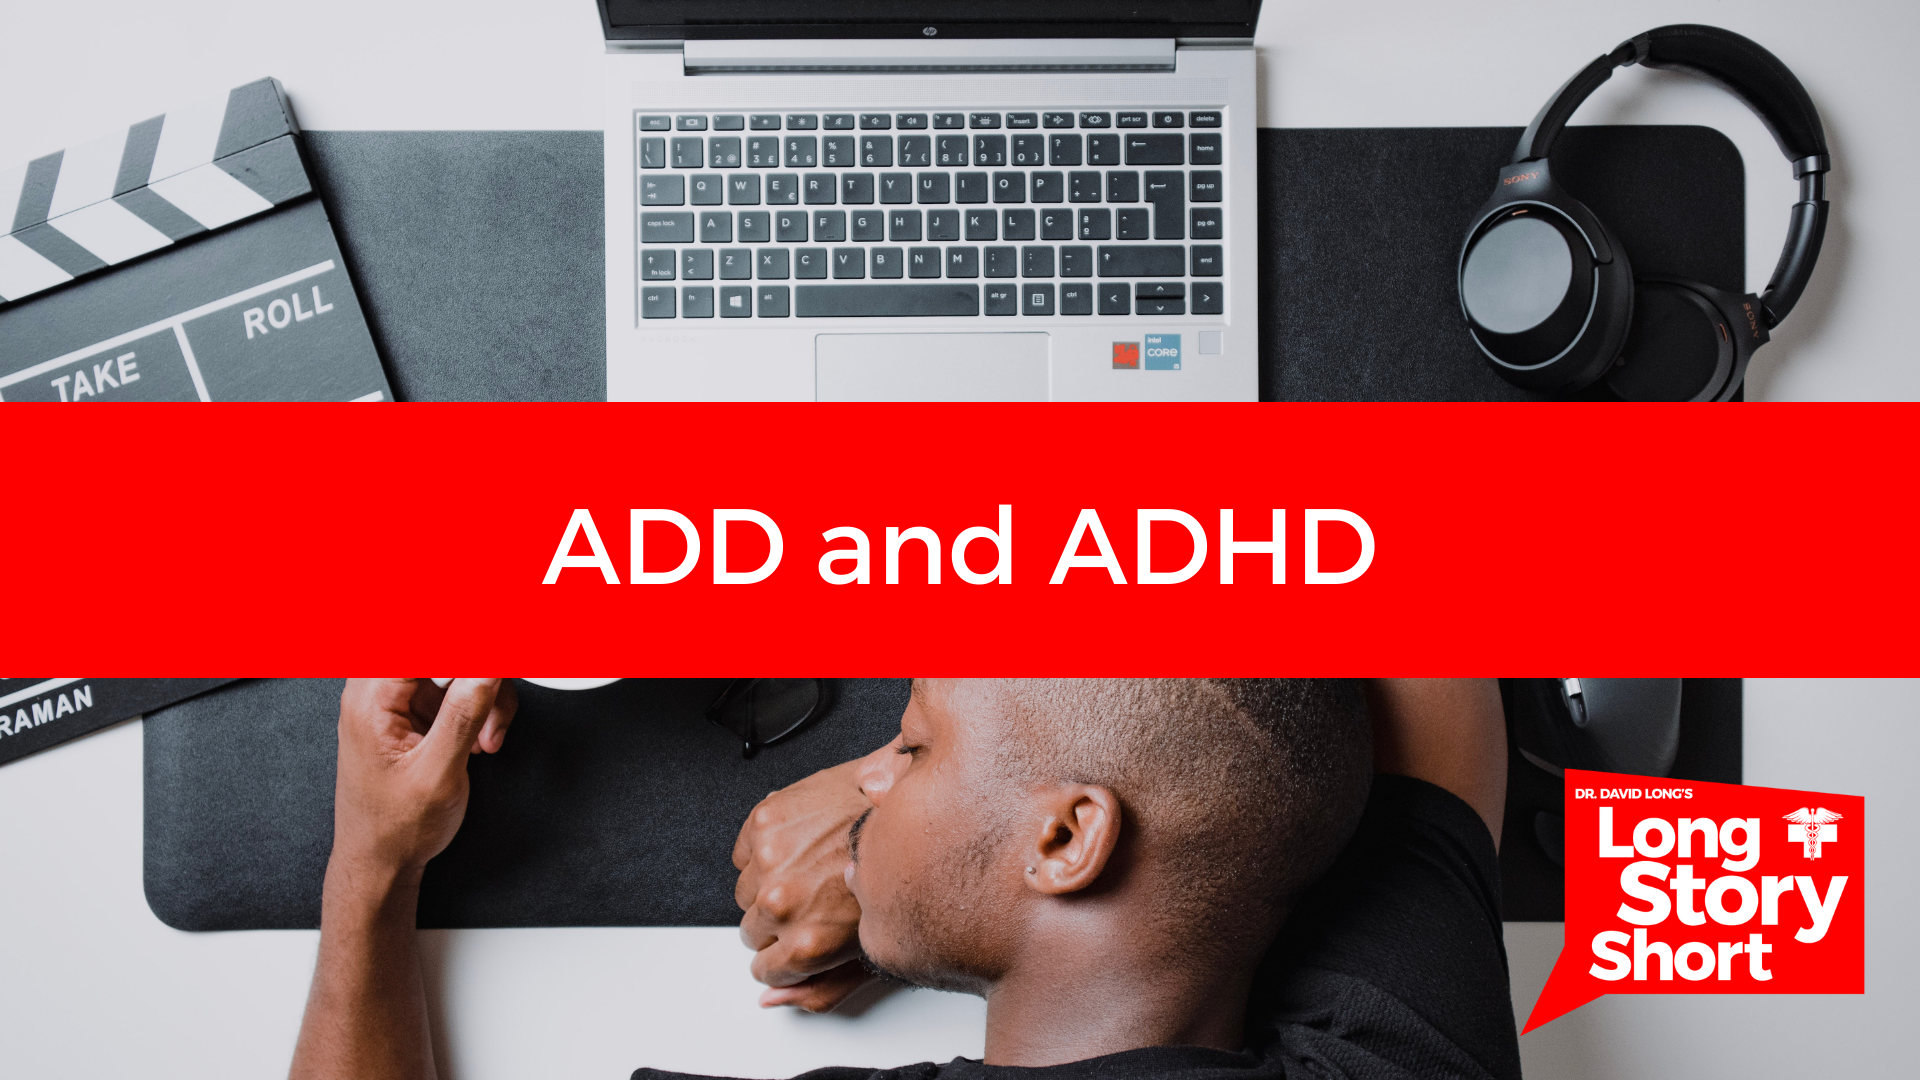 You are currently viewing ADD and ADHD – Dr. David Long